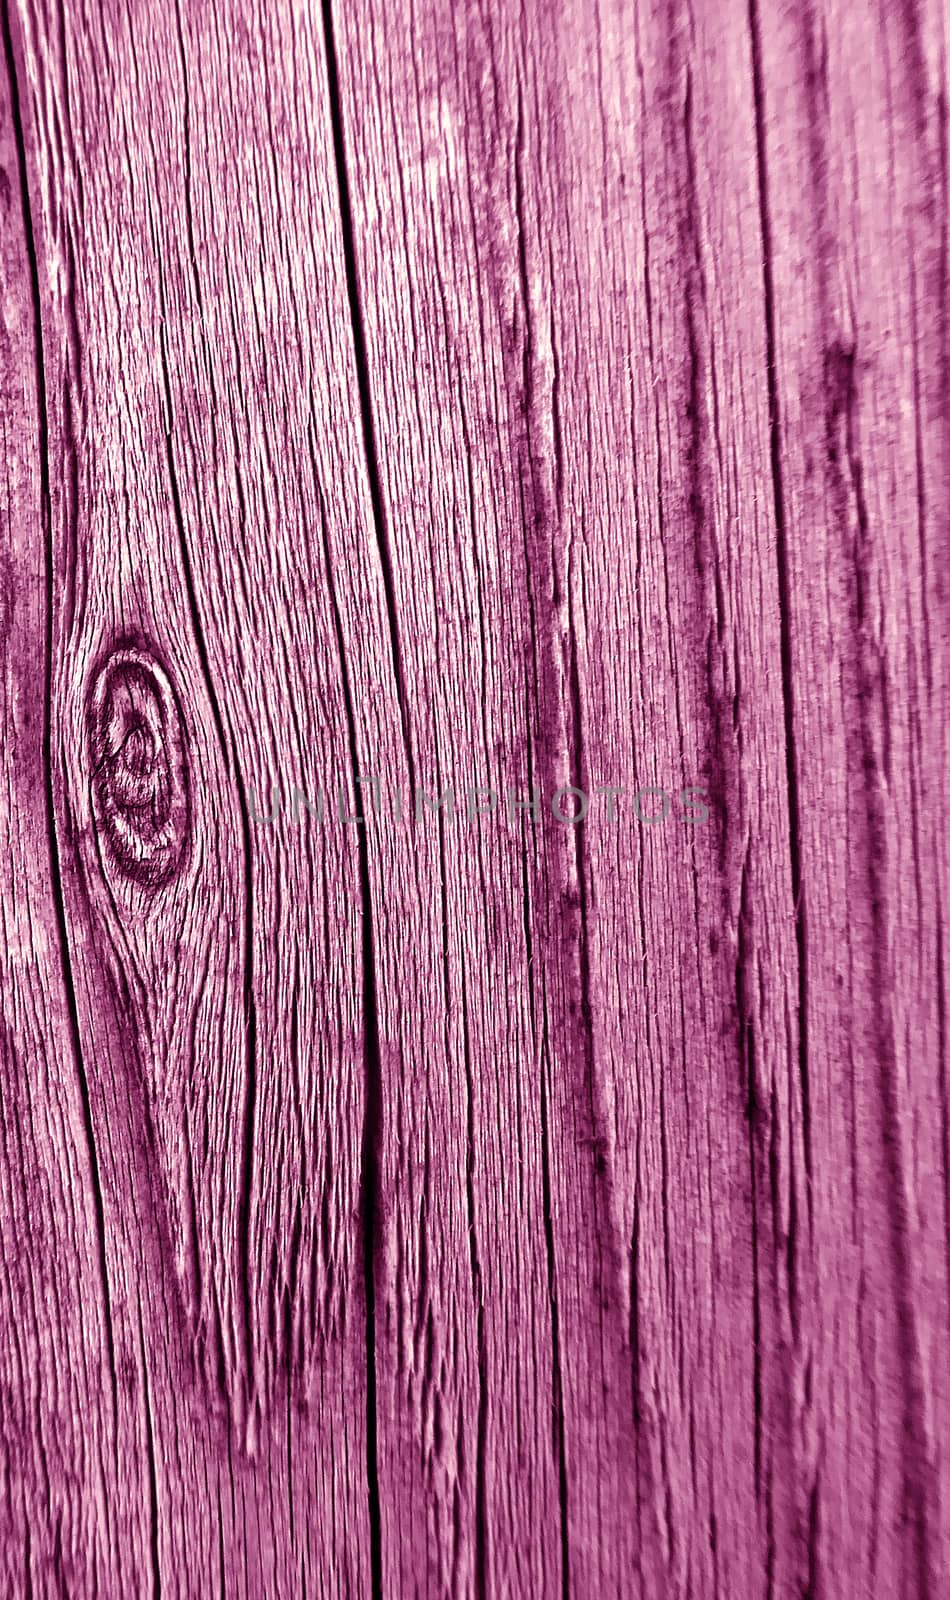 Picture of an Old weathered wood background , texture